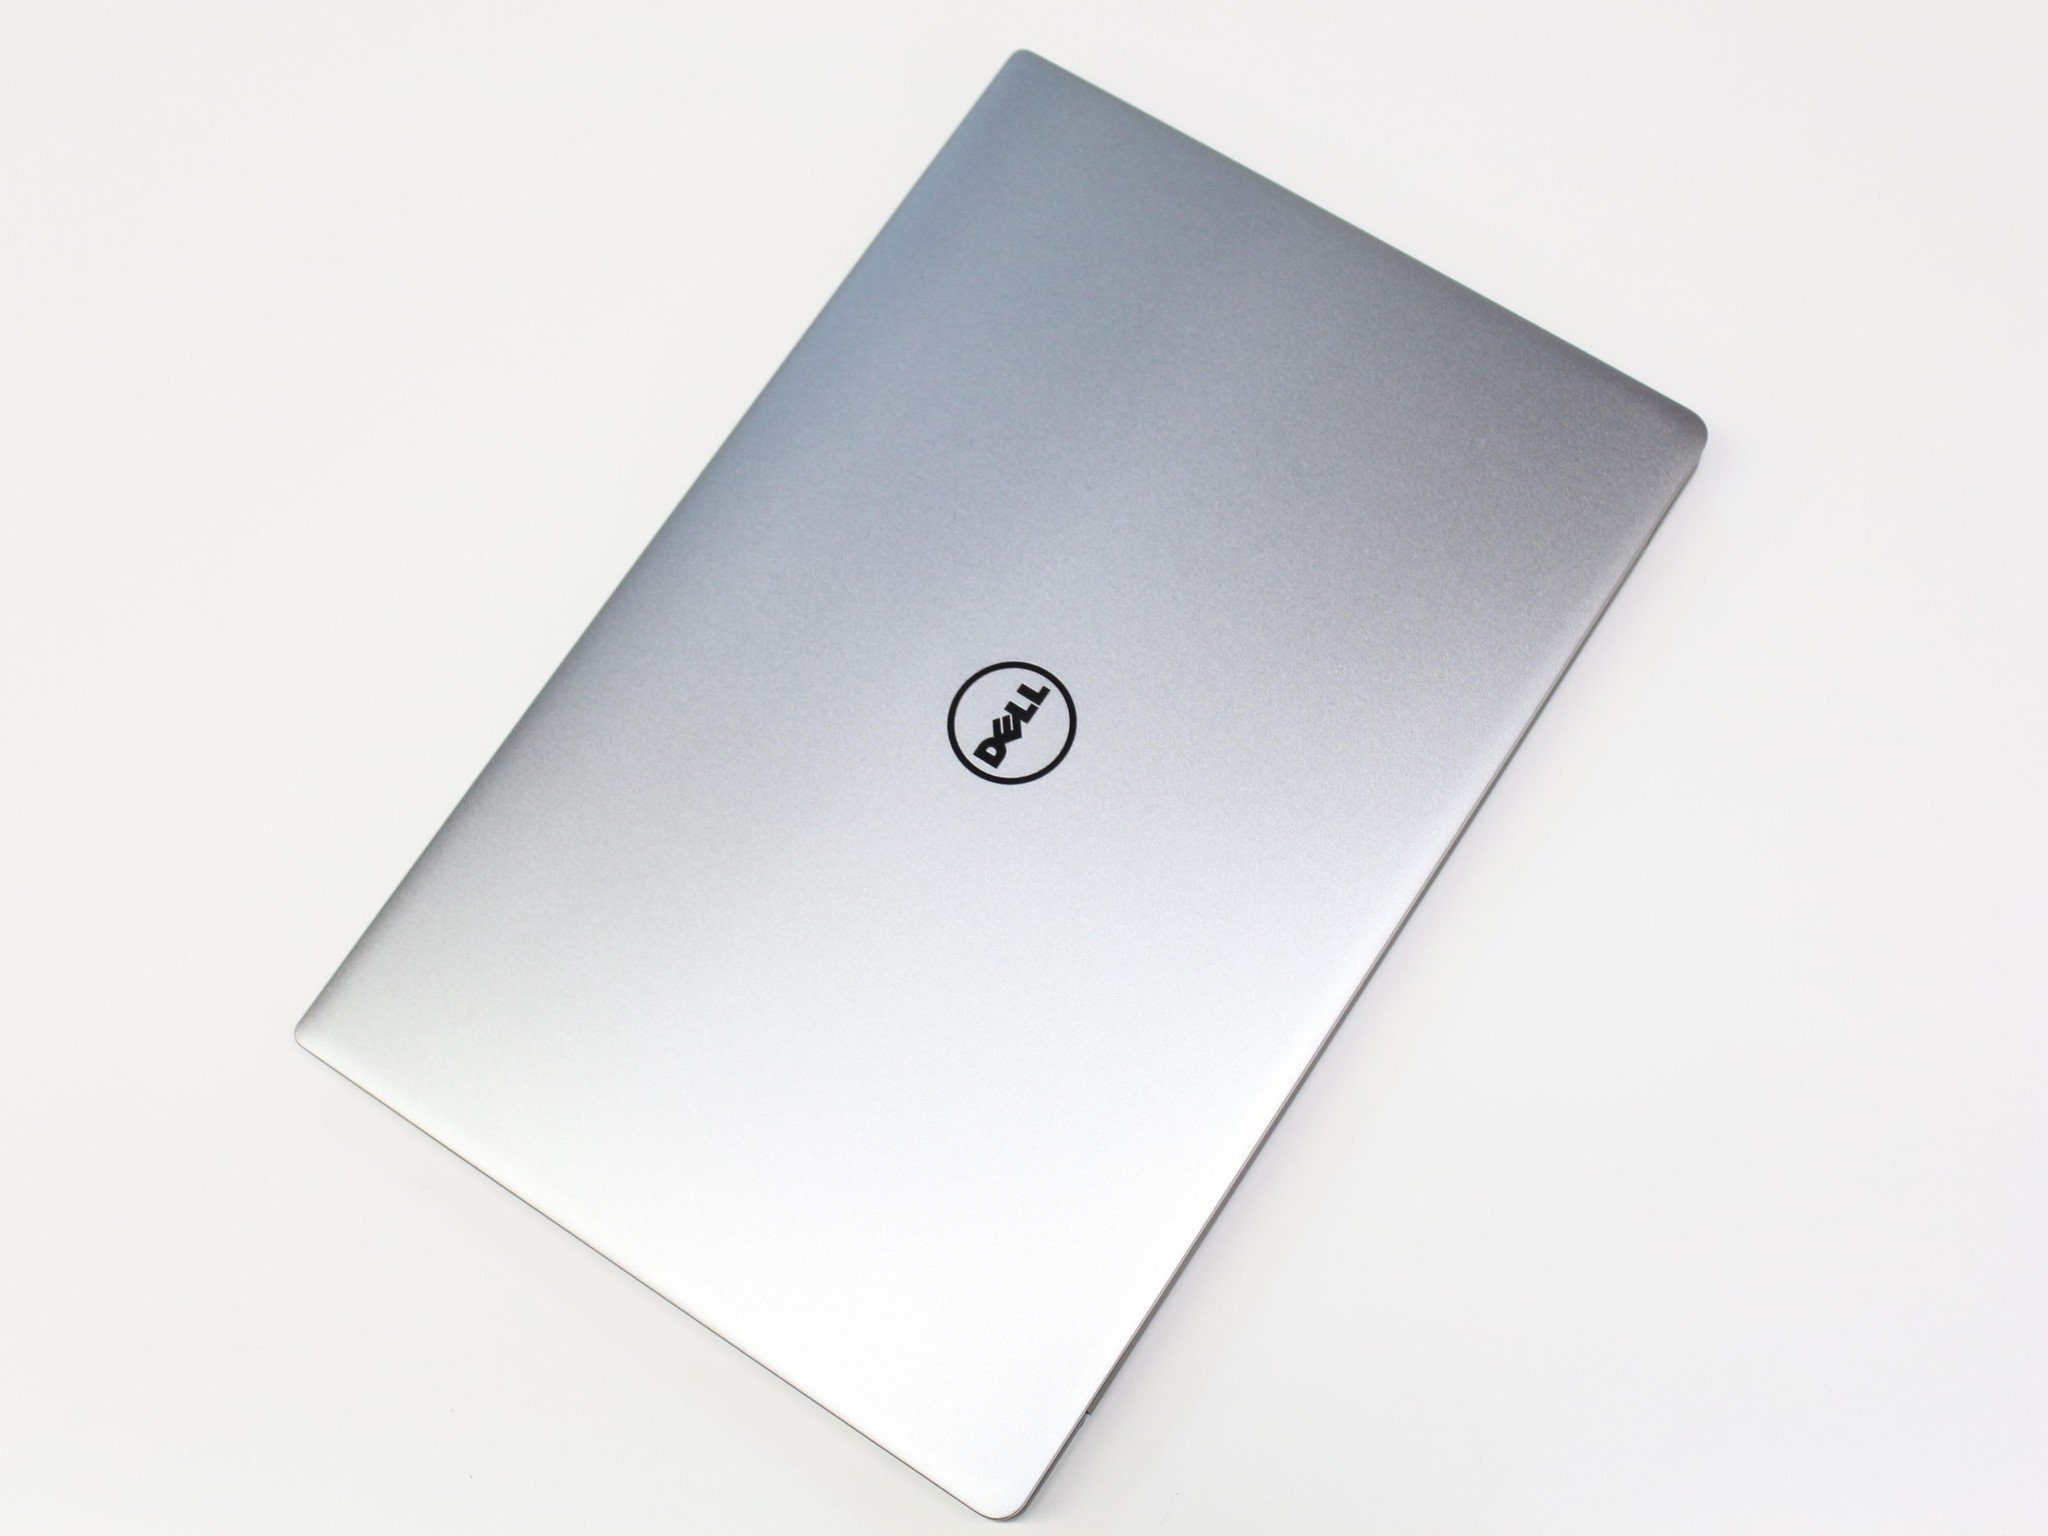 dell-xps-13-top-dell-logo-style-01.JPG